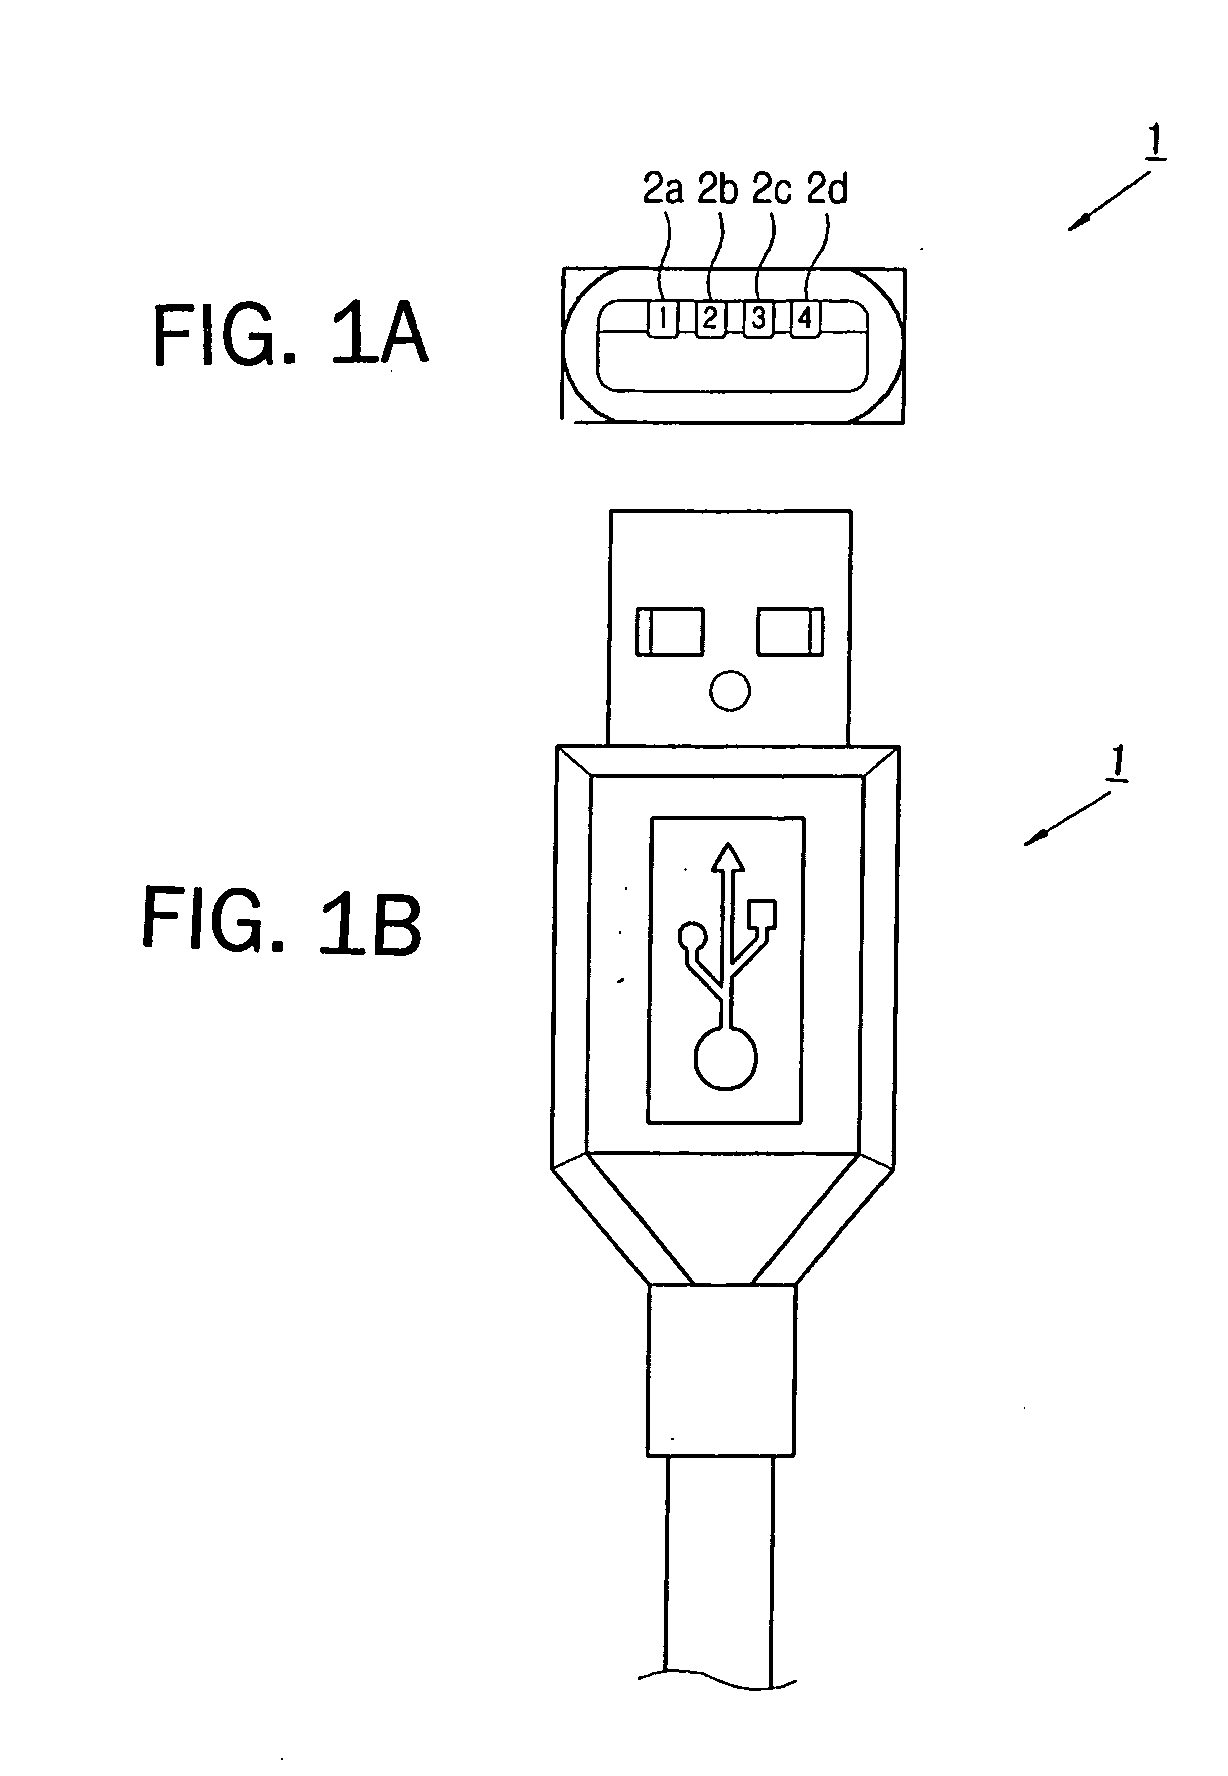 USB circuit device for preventing reverse current from external device